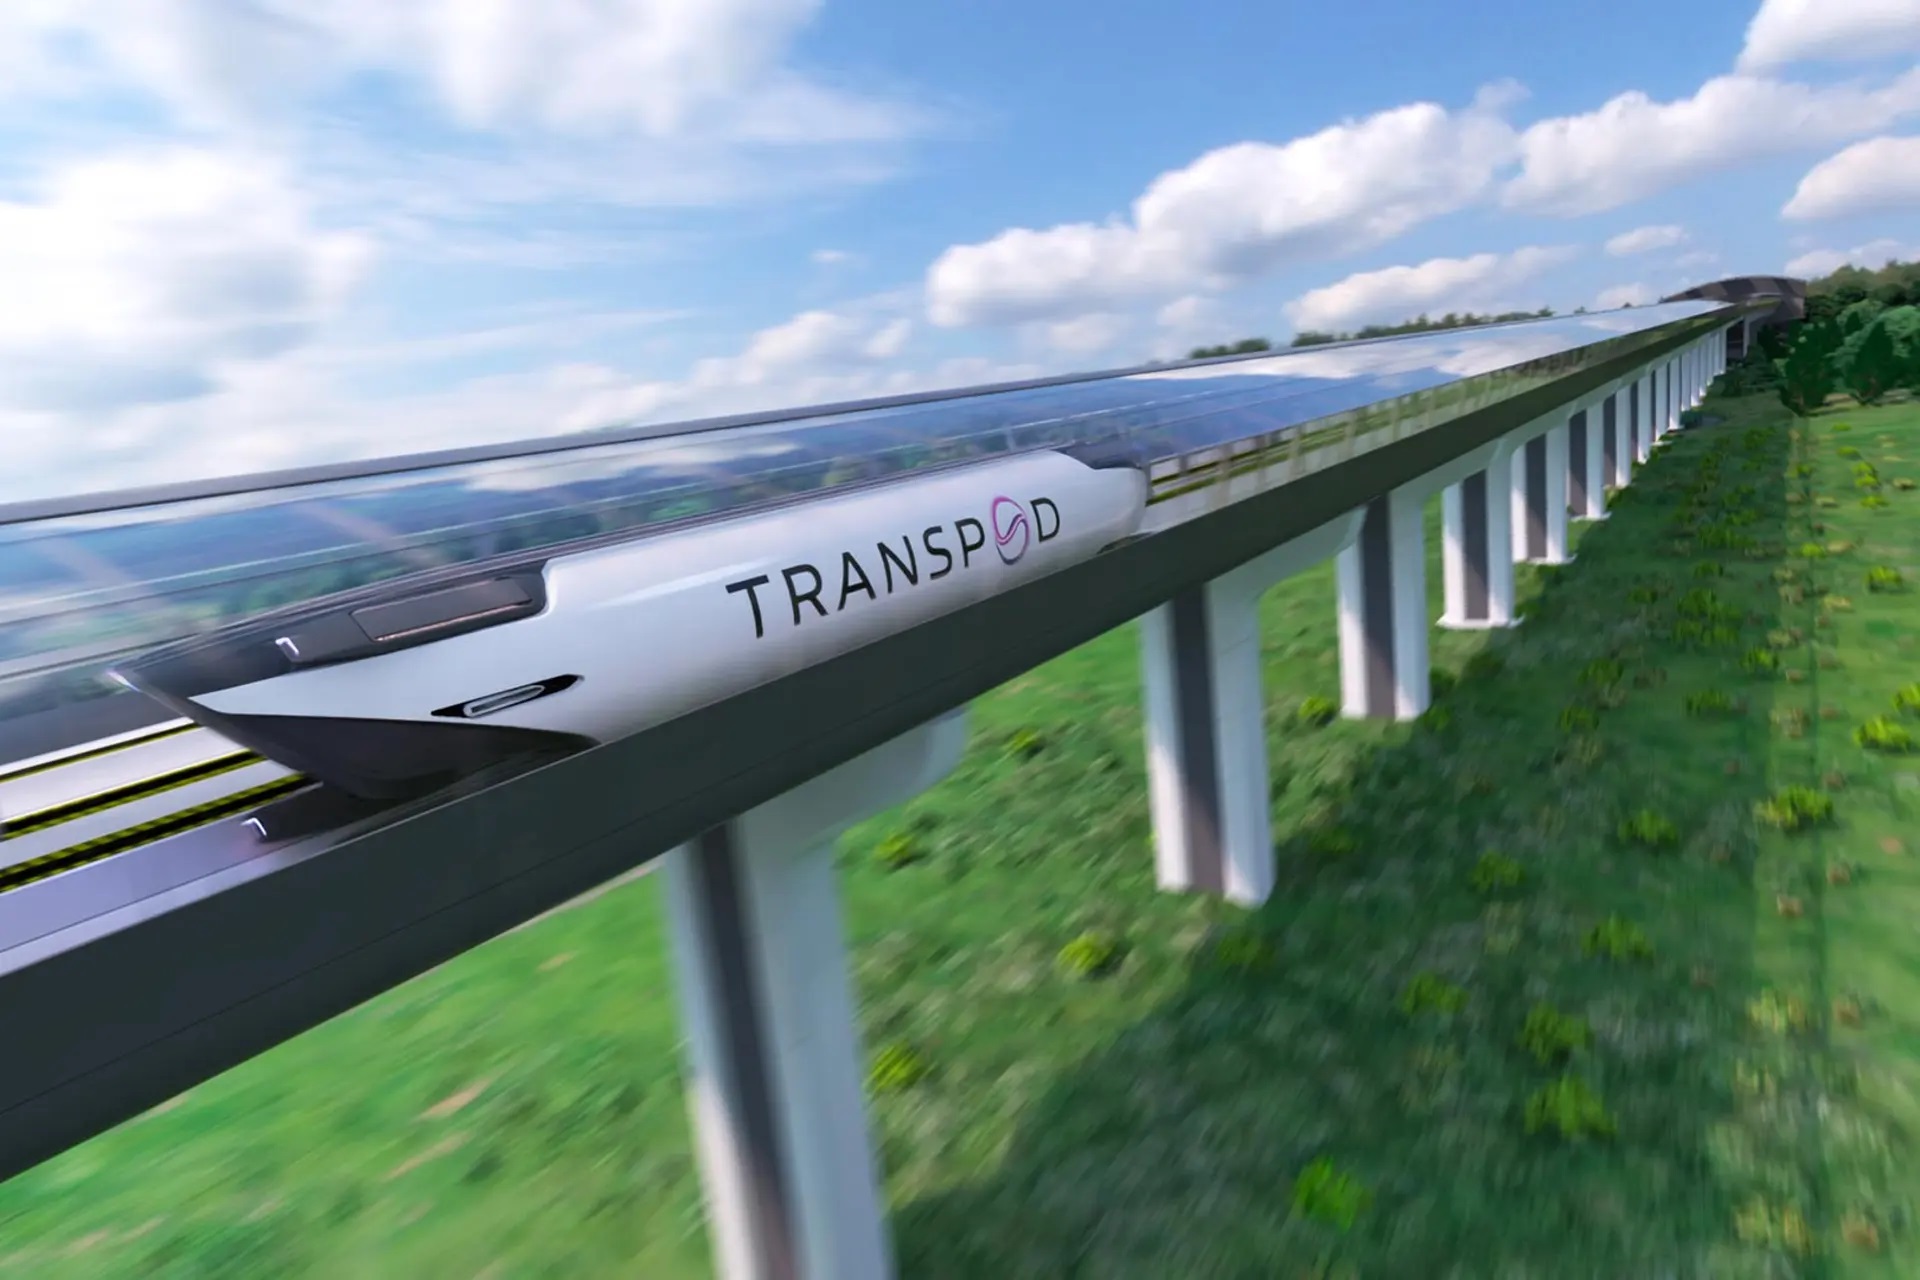 A new type of hyperloop aims for speeds over 1,000 km/h